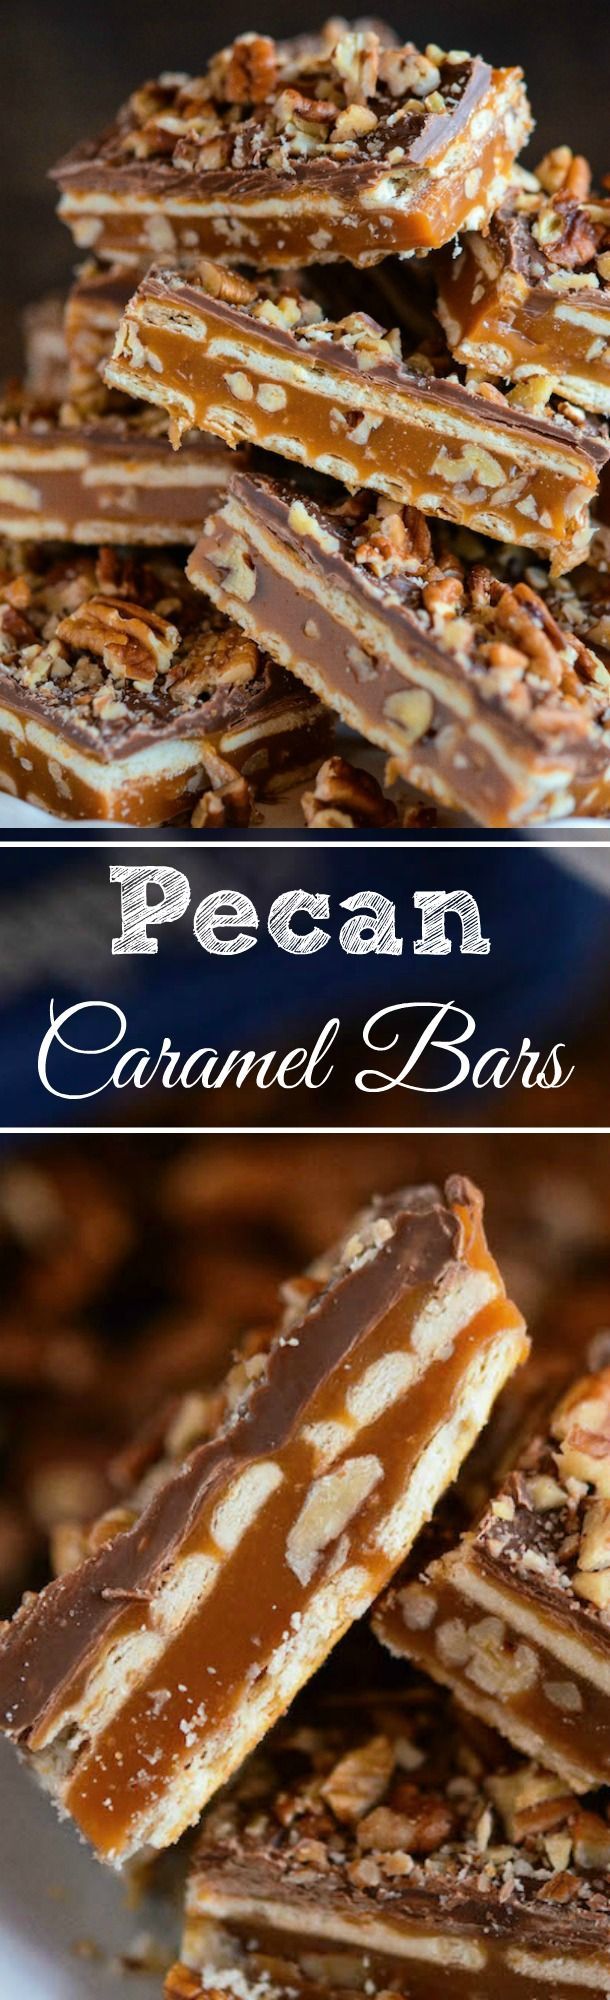 Pecan Caramel Crisp Bars! You only need 5 ingredients to make these gorgeous homem